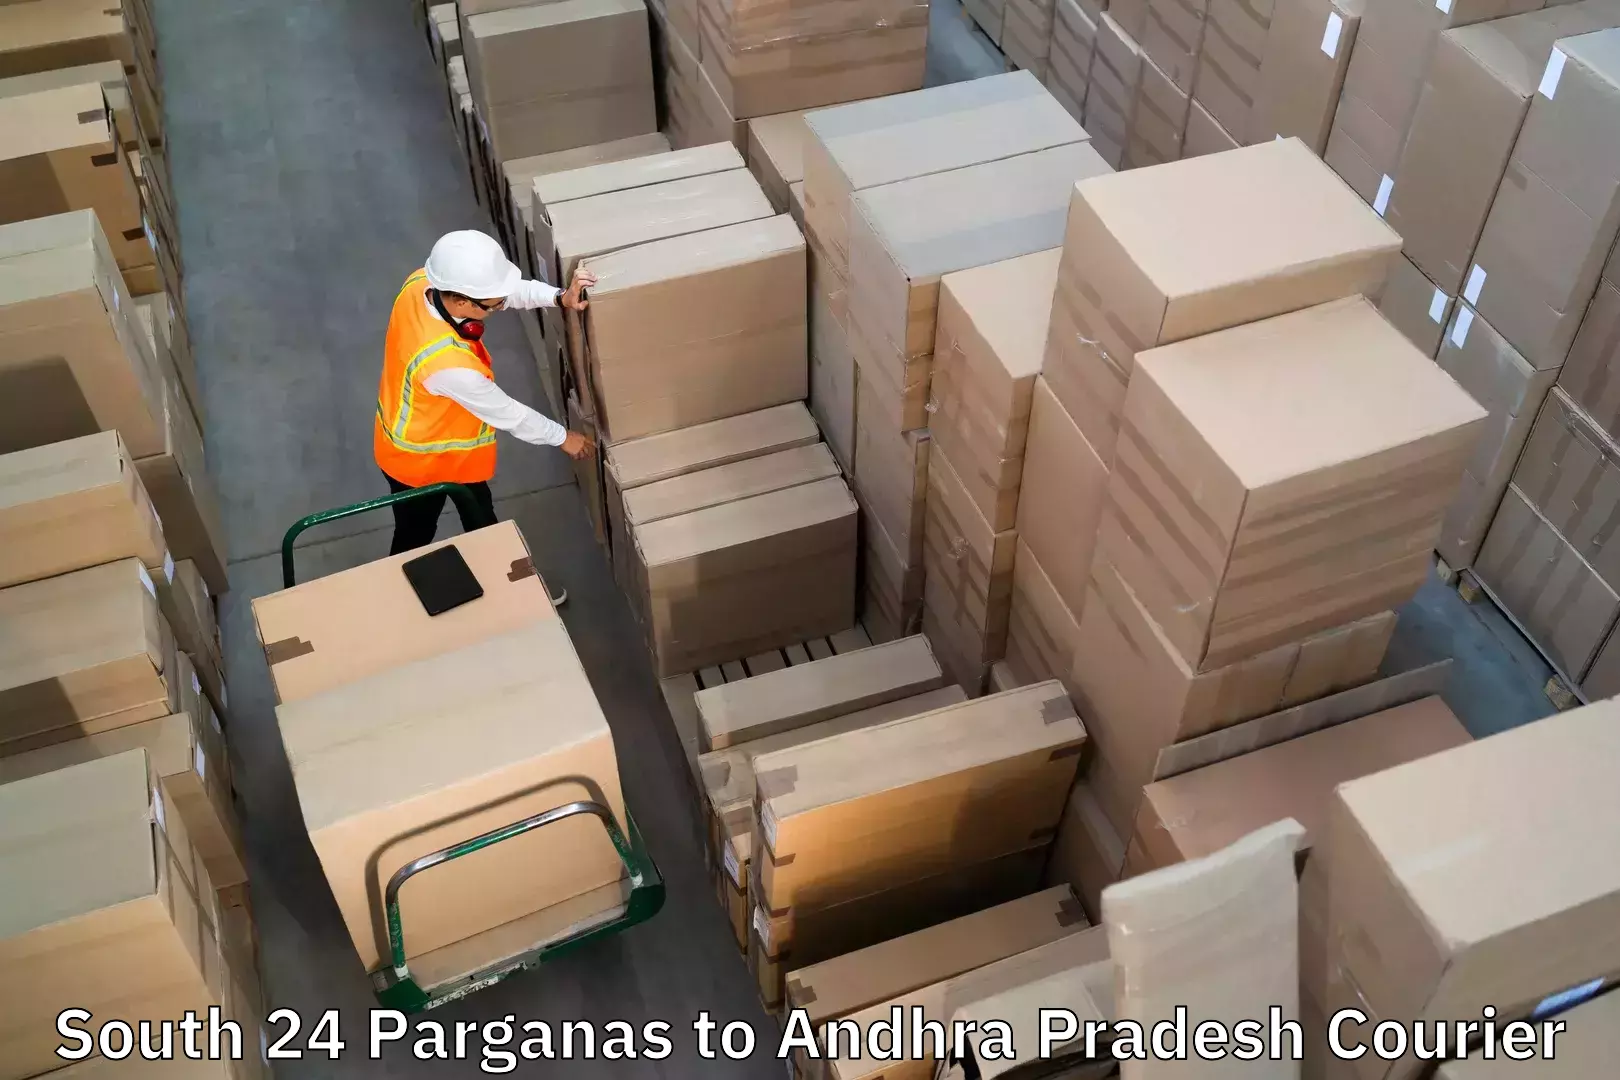 Luggage shipment tracking South 24 Parganas to Srisailam